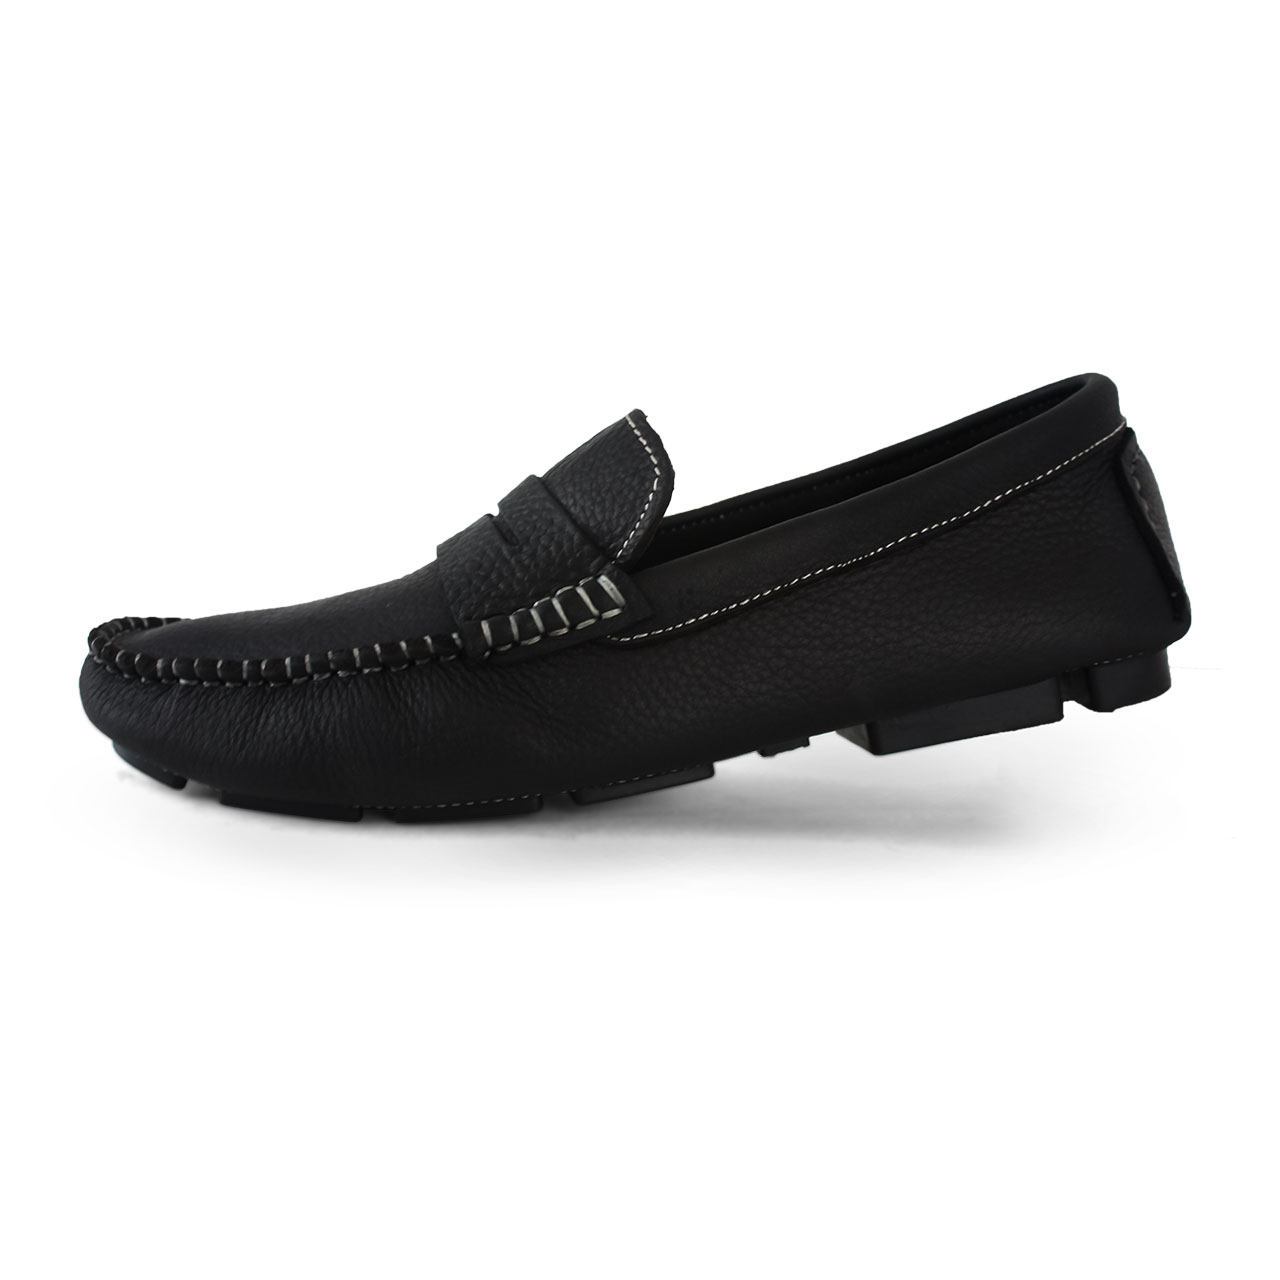 Men's Boat Fall Suede Casual Flat Heel Shoes Slip On Penny Loafers